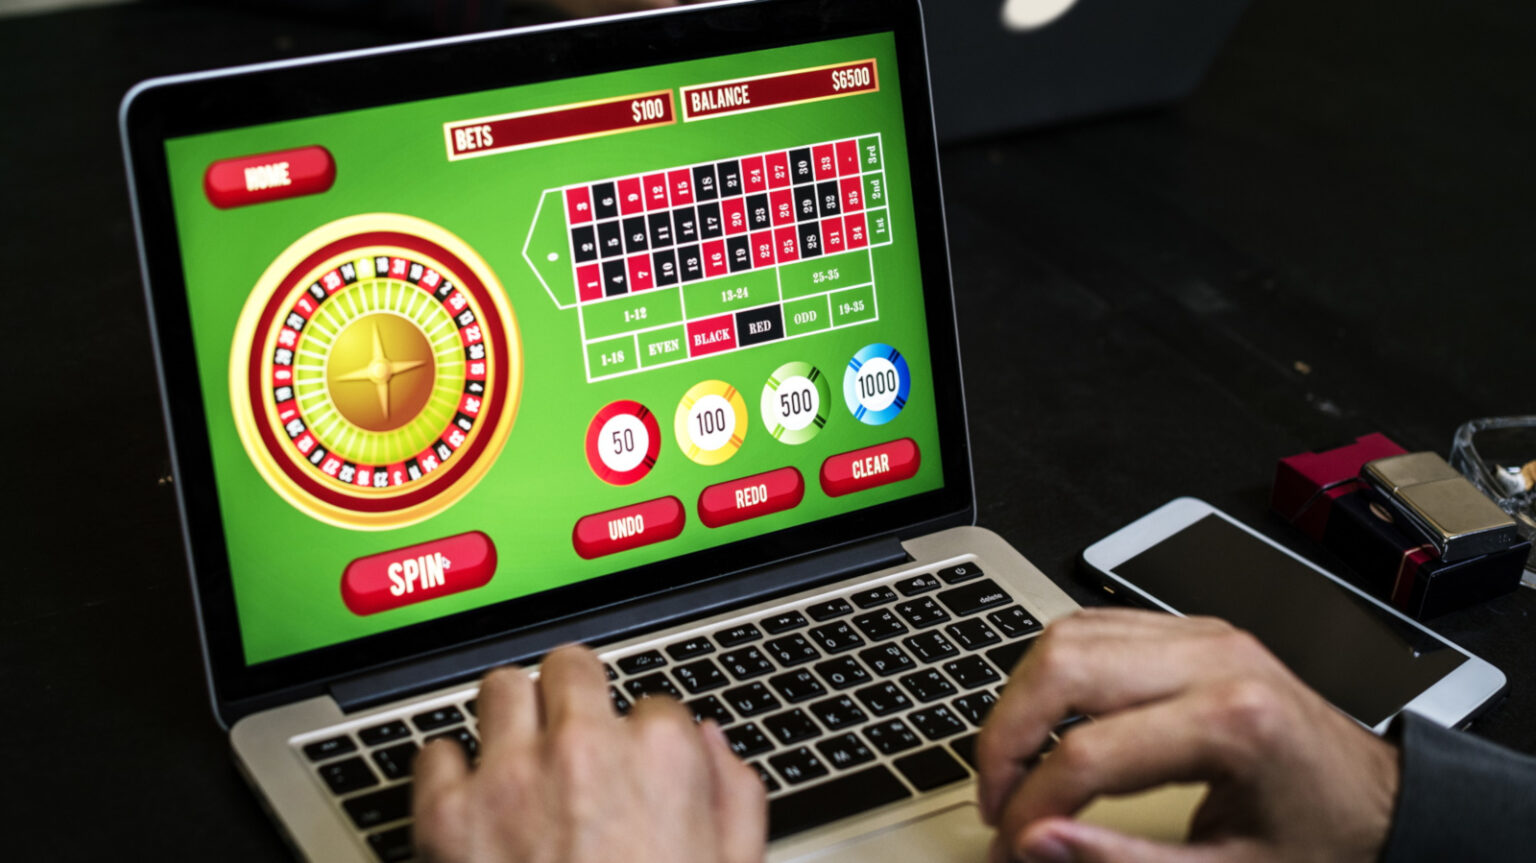 How do you know if an online gaming site is trustworthy? Check our tips and tricks to carefully vet online casinos before you hop in and play!